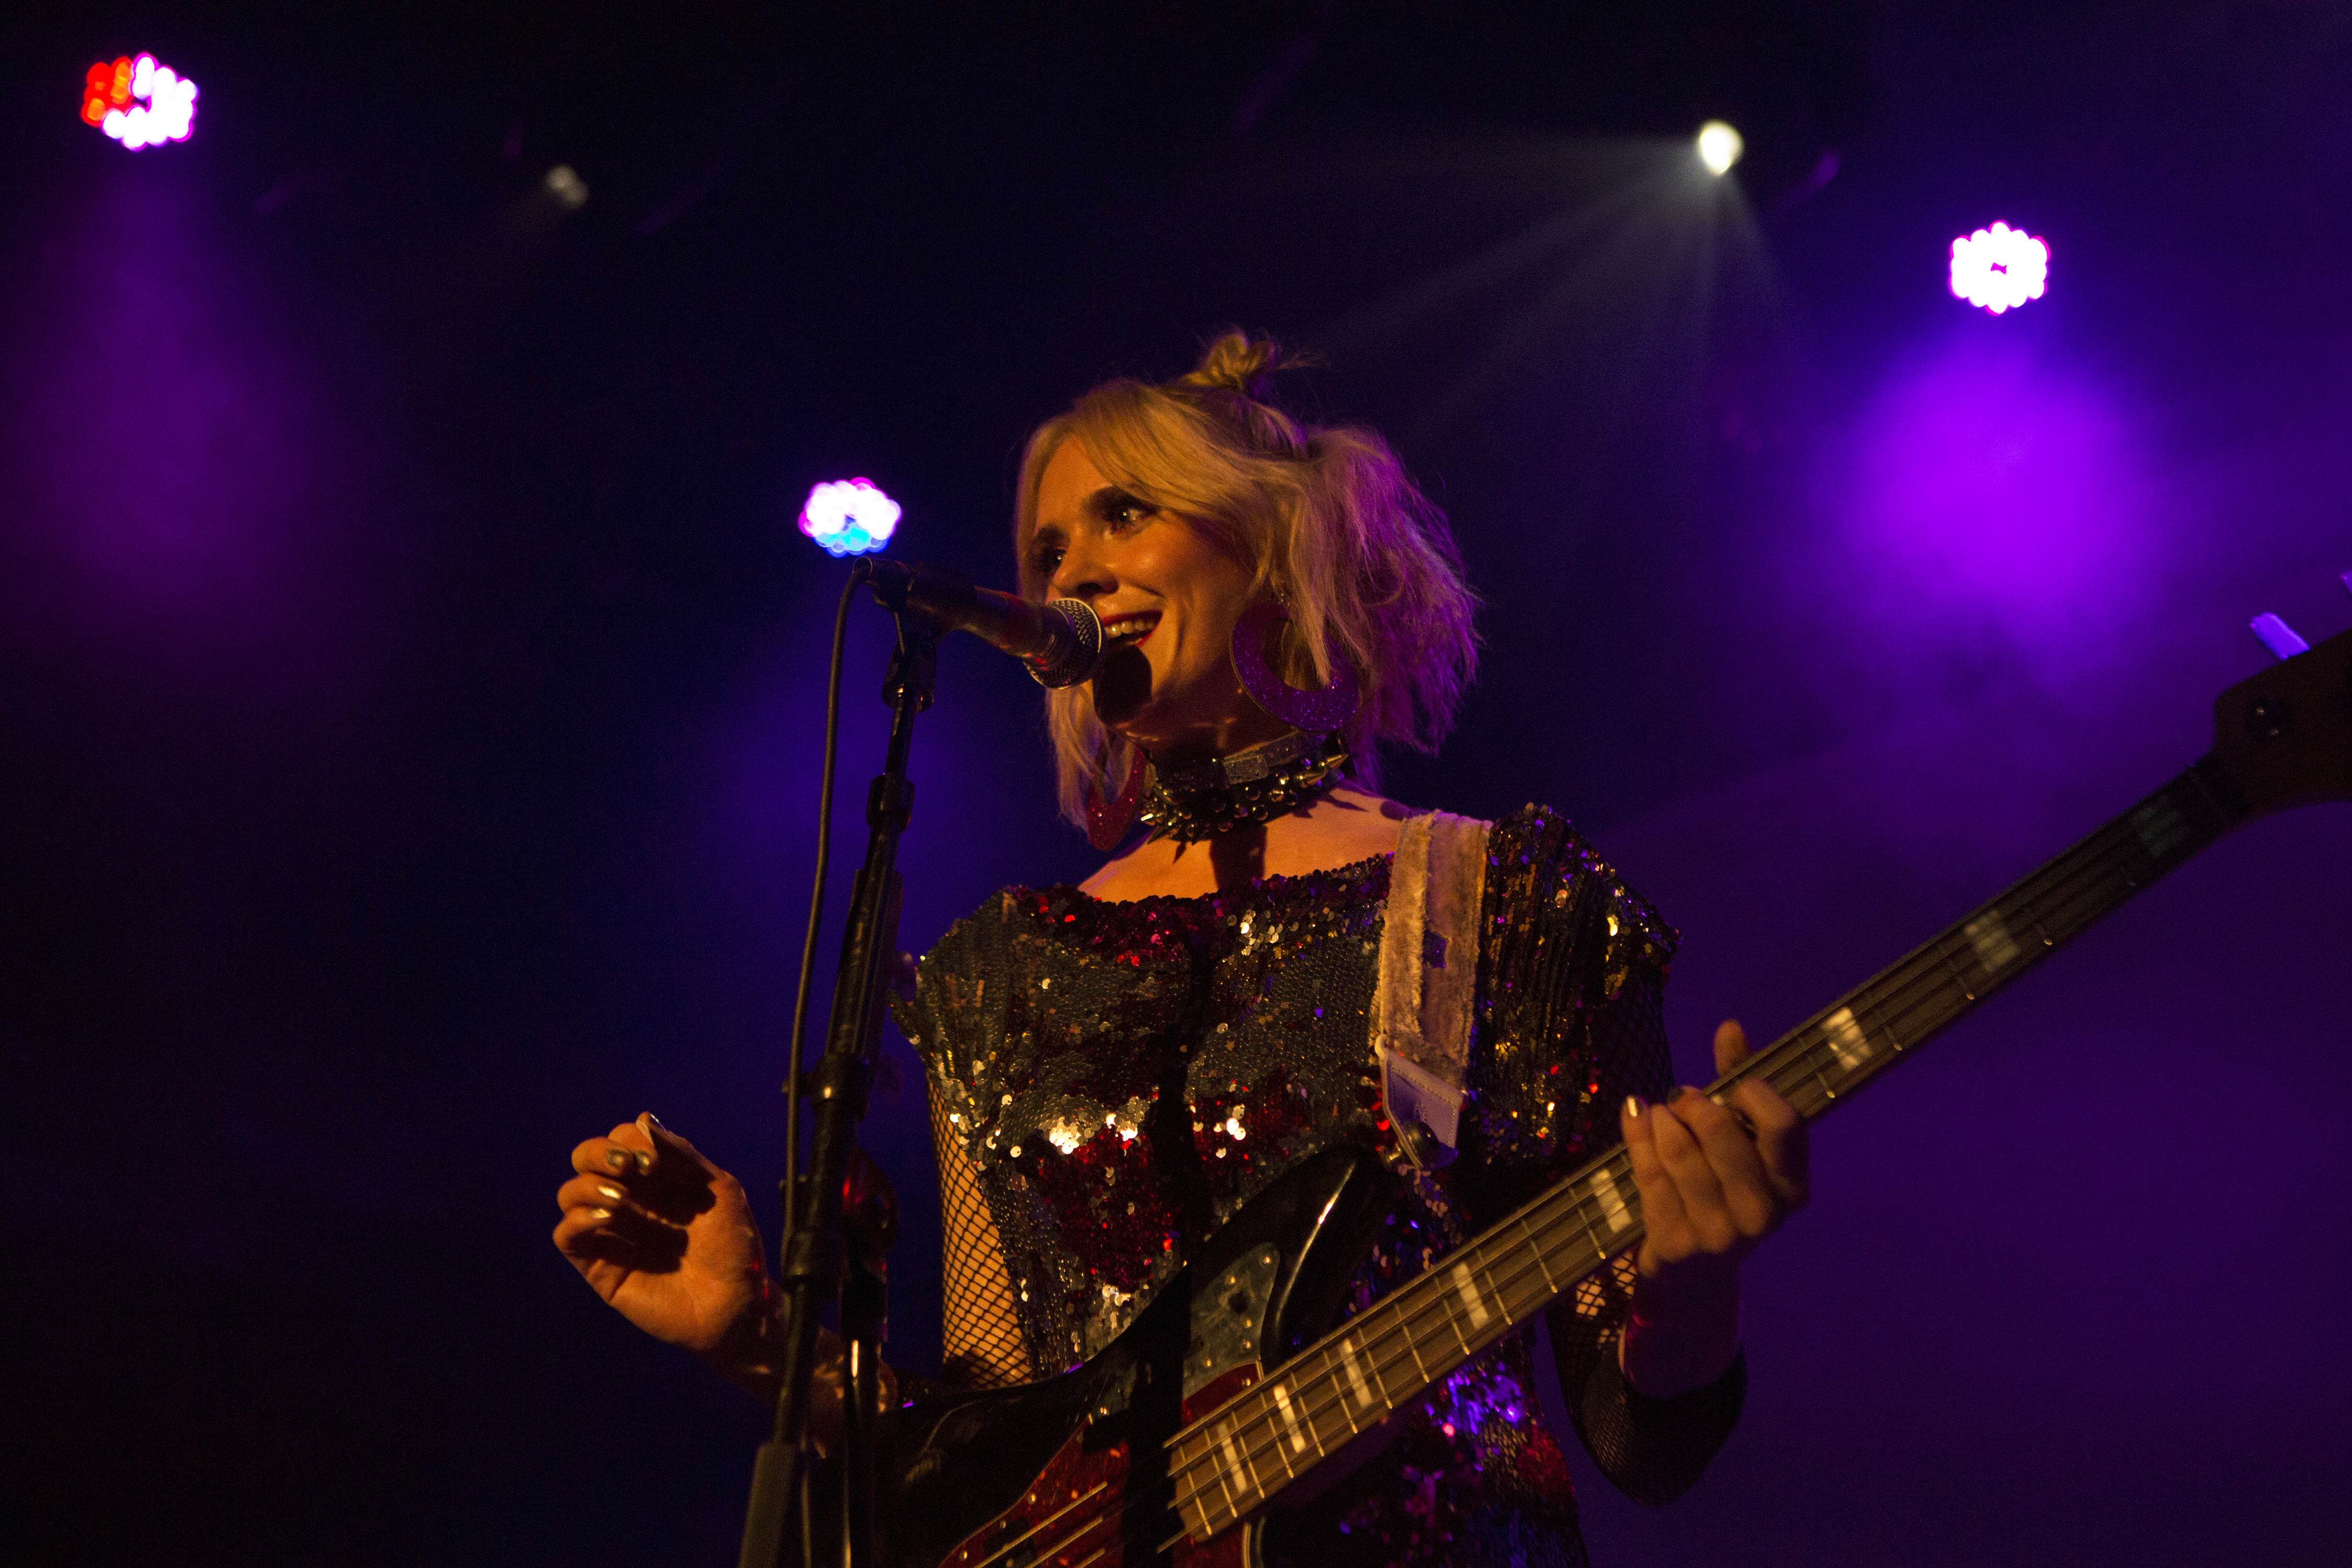 English singer/songwriter Kate Nash performs during CMJ Music Marathon Festival 2015 at Bowery Ballroom on Oct. 17, 2015 in New York City. (Adela Loconte/Getty Images)